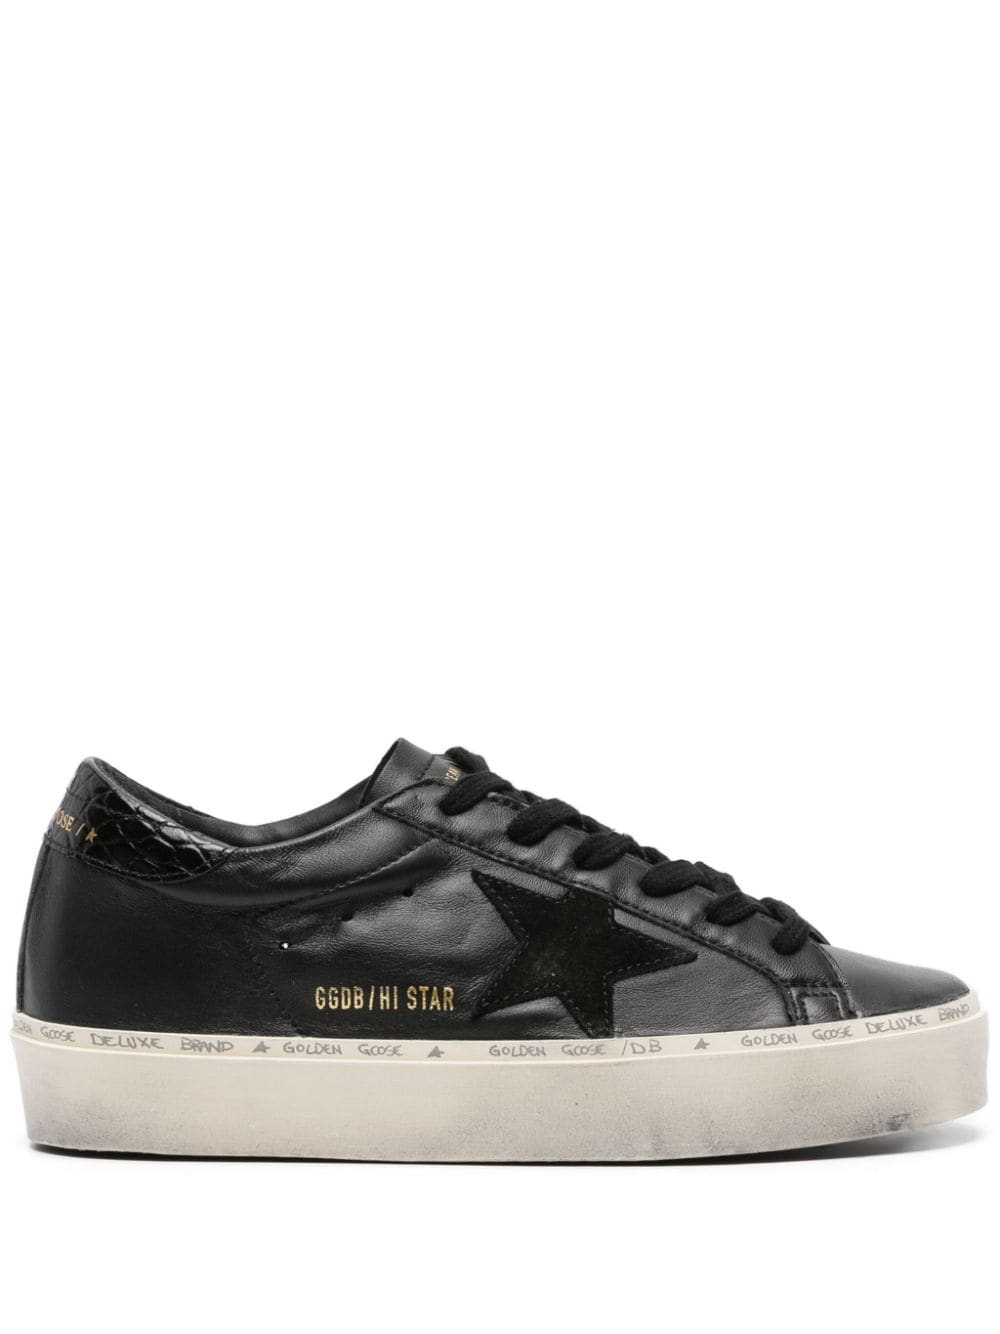 GOLDEN GOOSE Black Hi Star Sneakers for Women - SS24 Collection